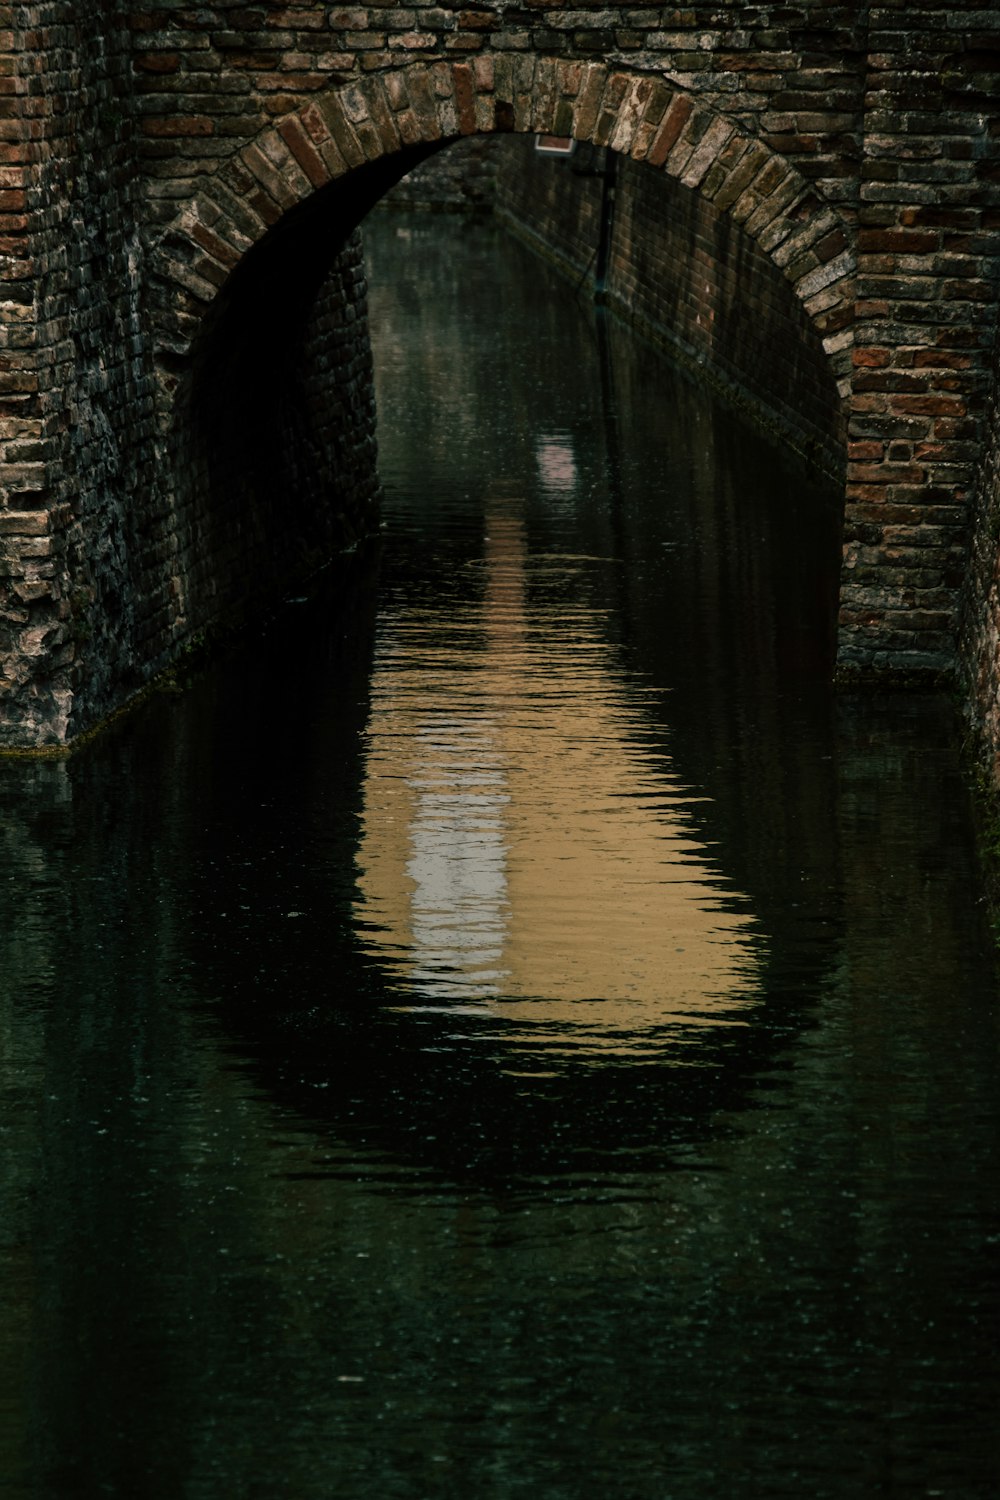 reflection of gray concrete bridge on water during daytime